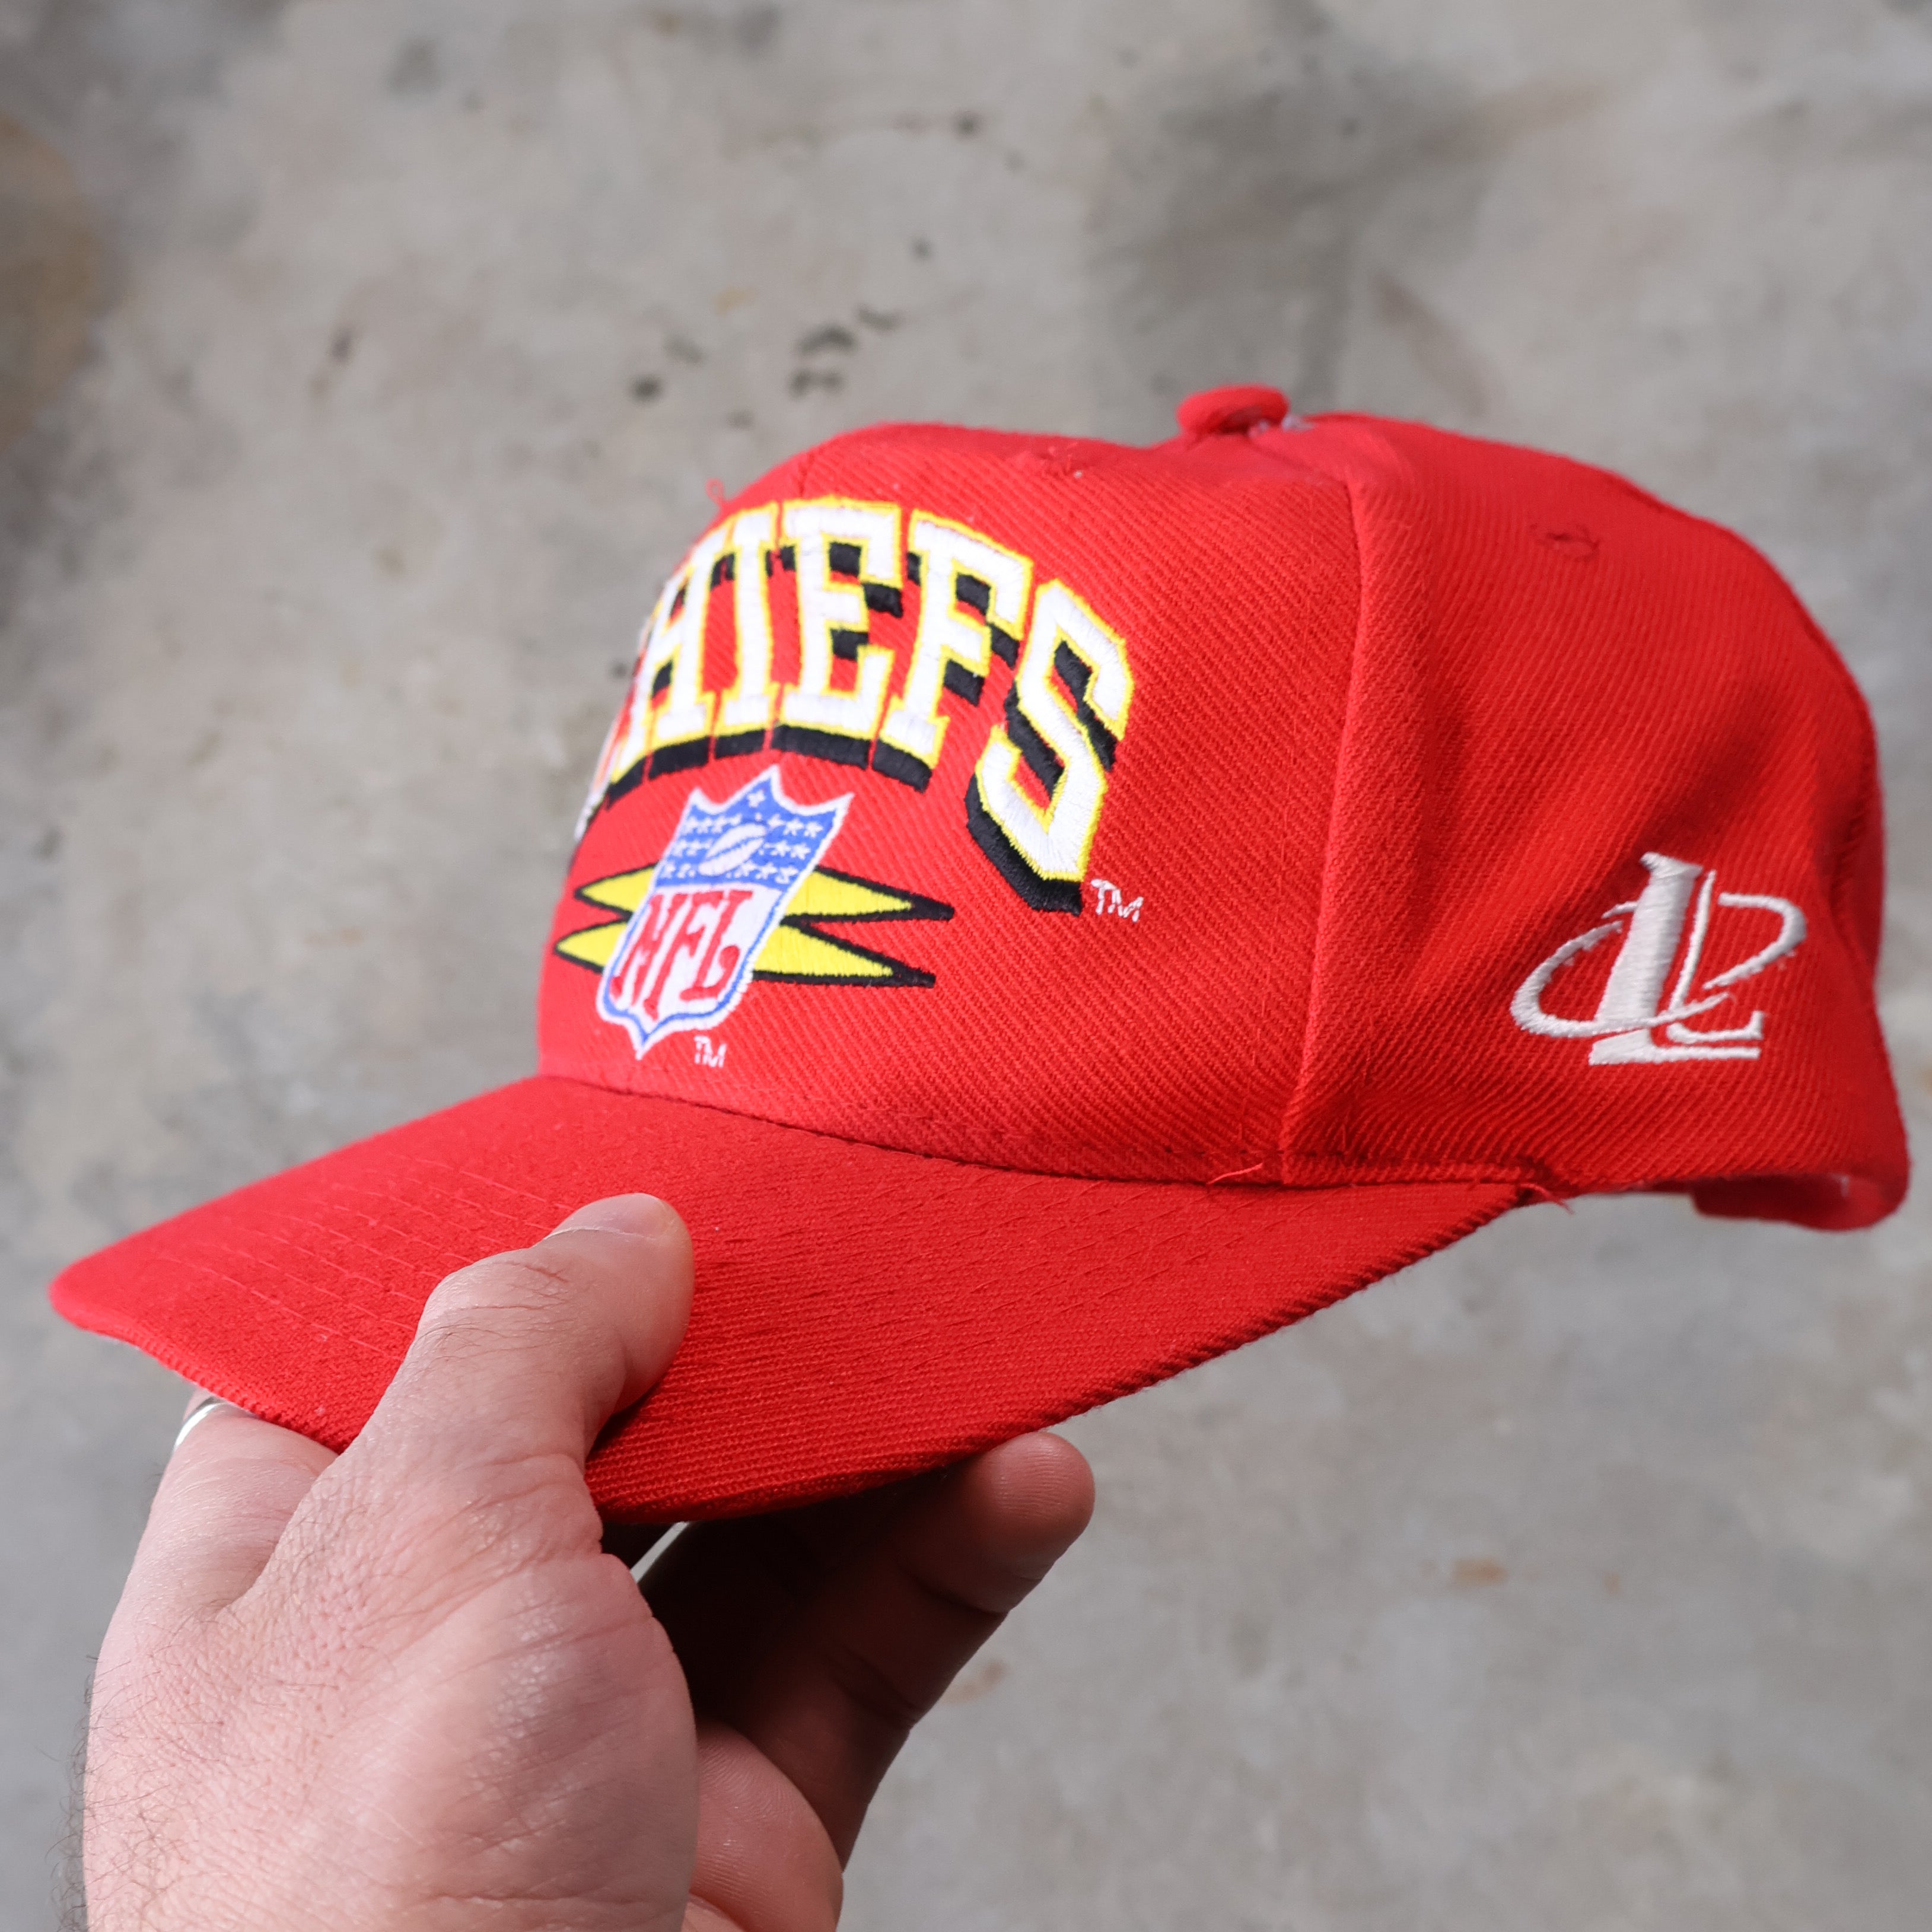 Chiefs Logo Athletic Spike Snapback Hat 90s